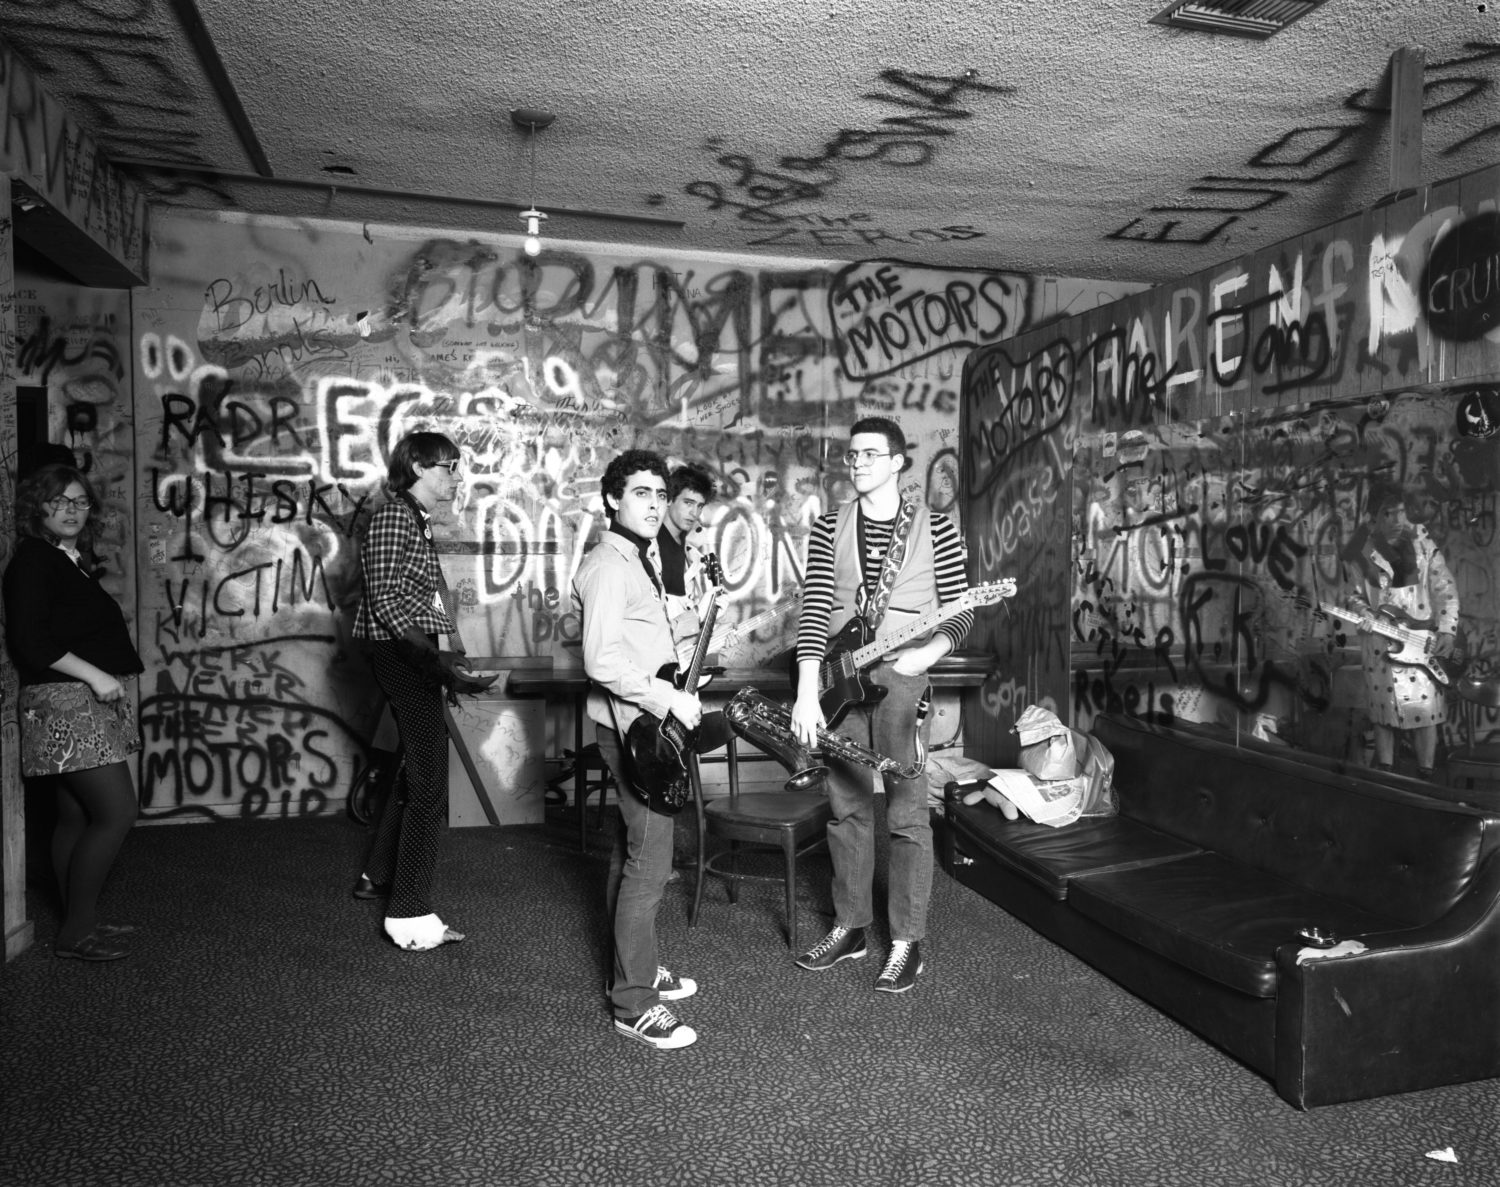 The Dickies backstage at the Whisky circa 1978. Photography by Jules Bates 2